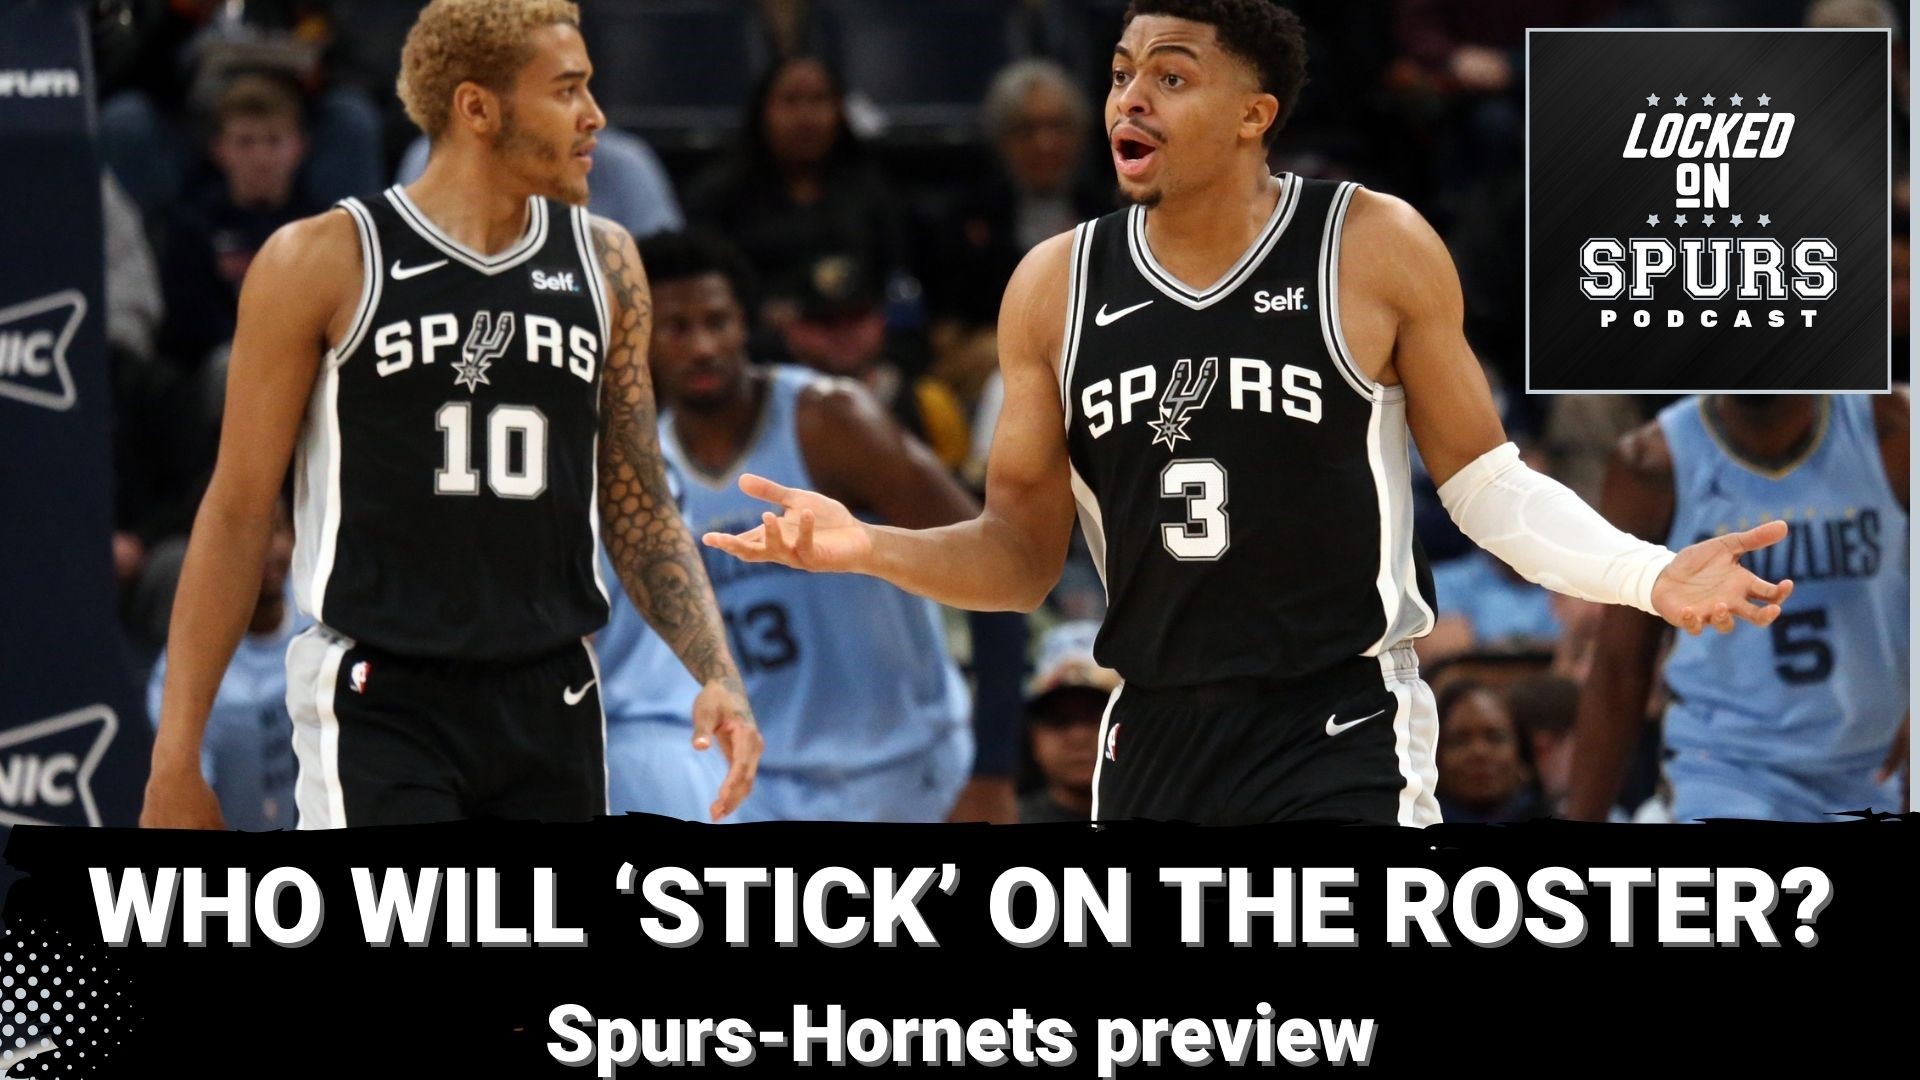 Also, a quick Spurs-Hawks preview.